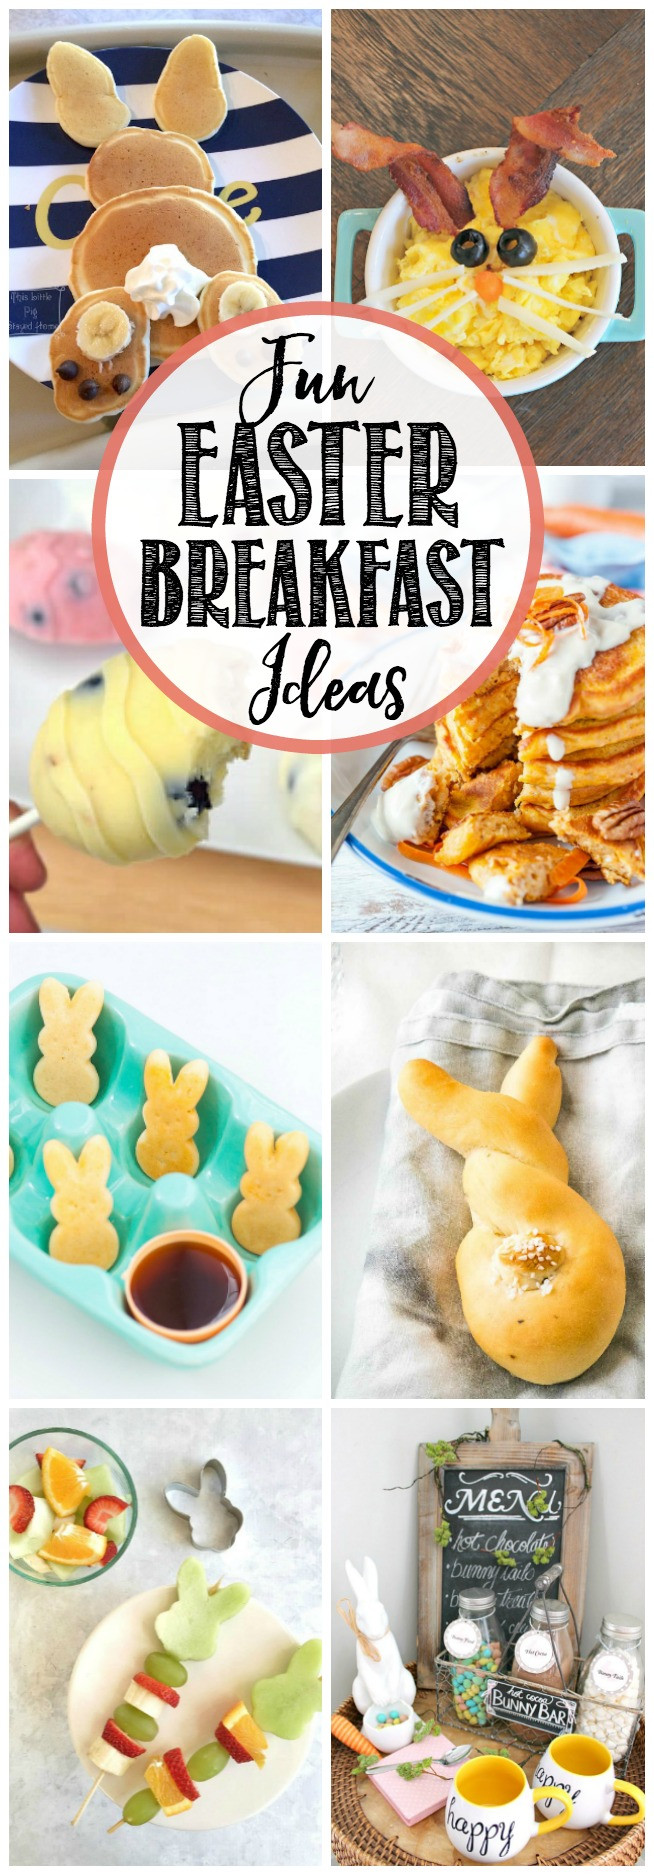 Easter Morning Ideas
 Easter Breakfast Ideas for Kids Clean and Scentsible